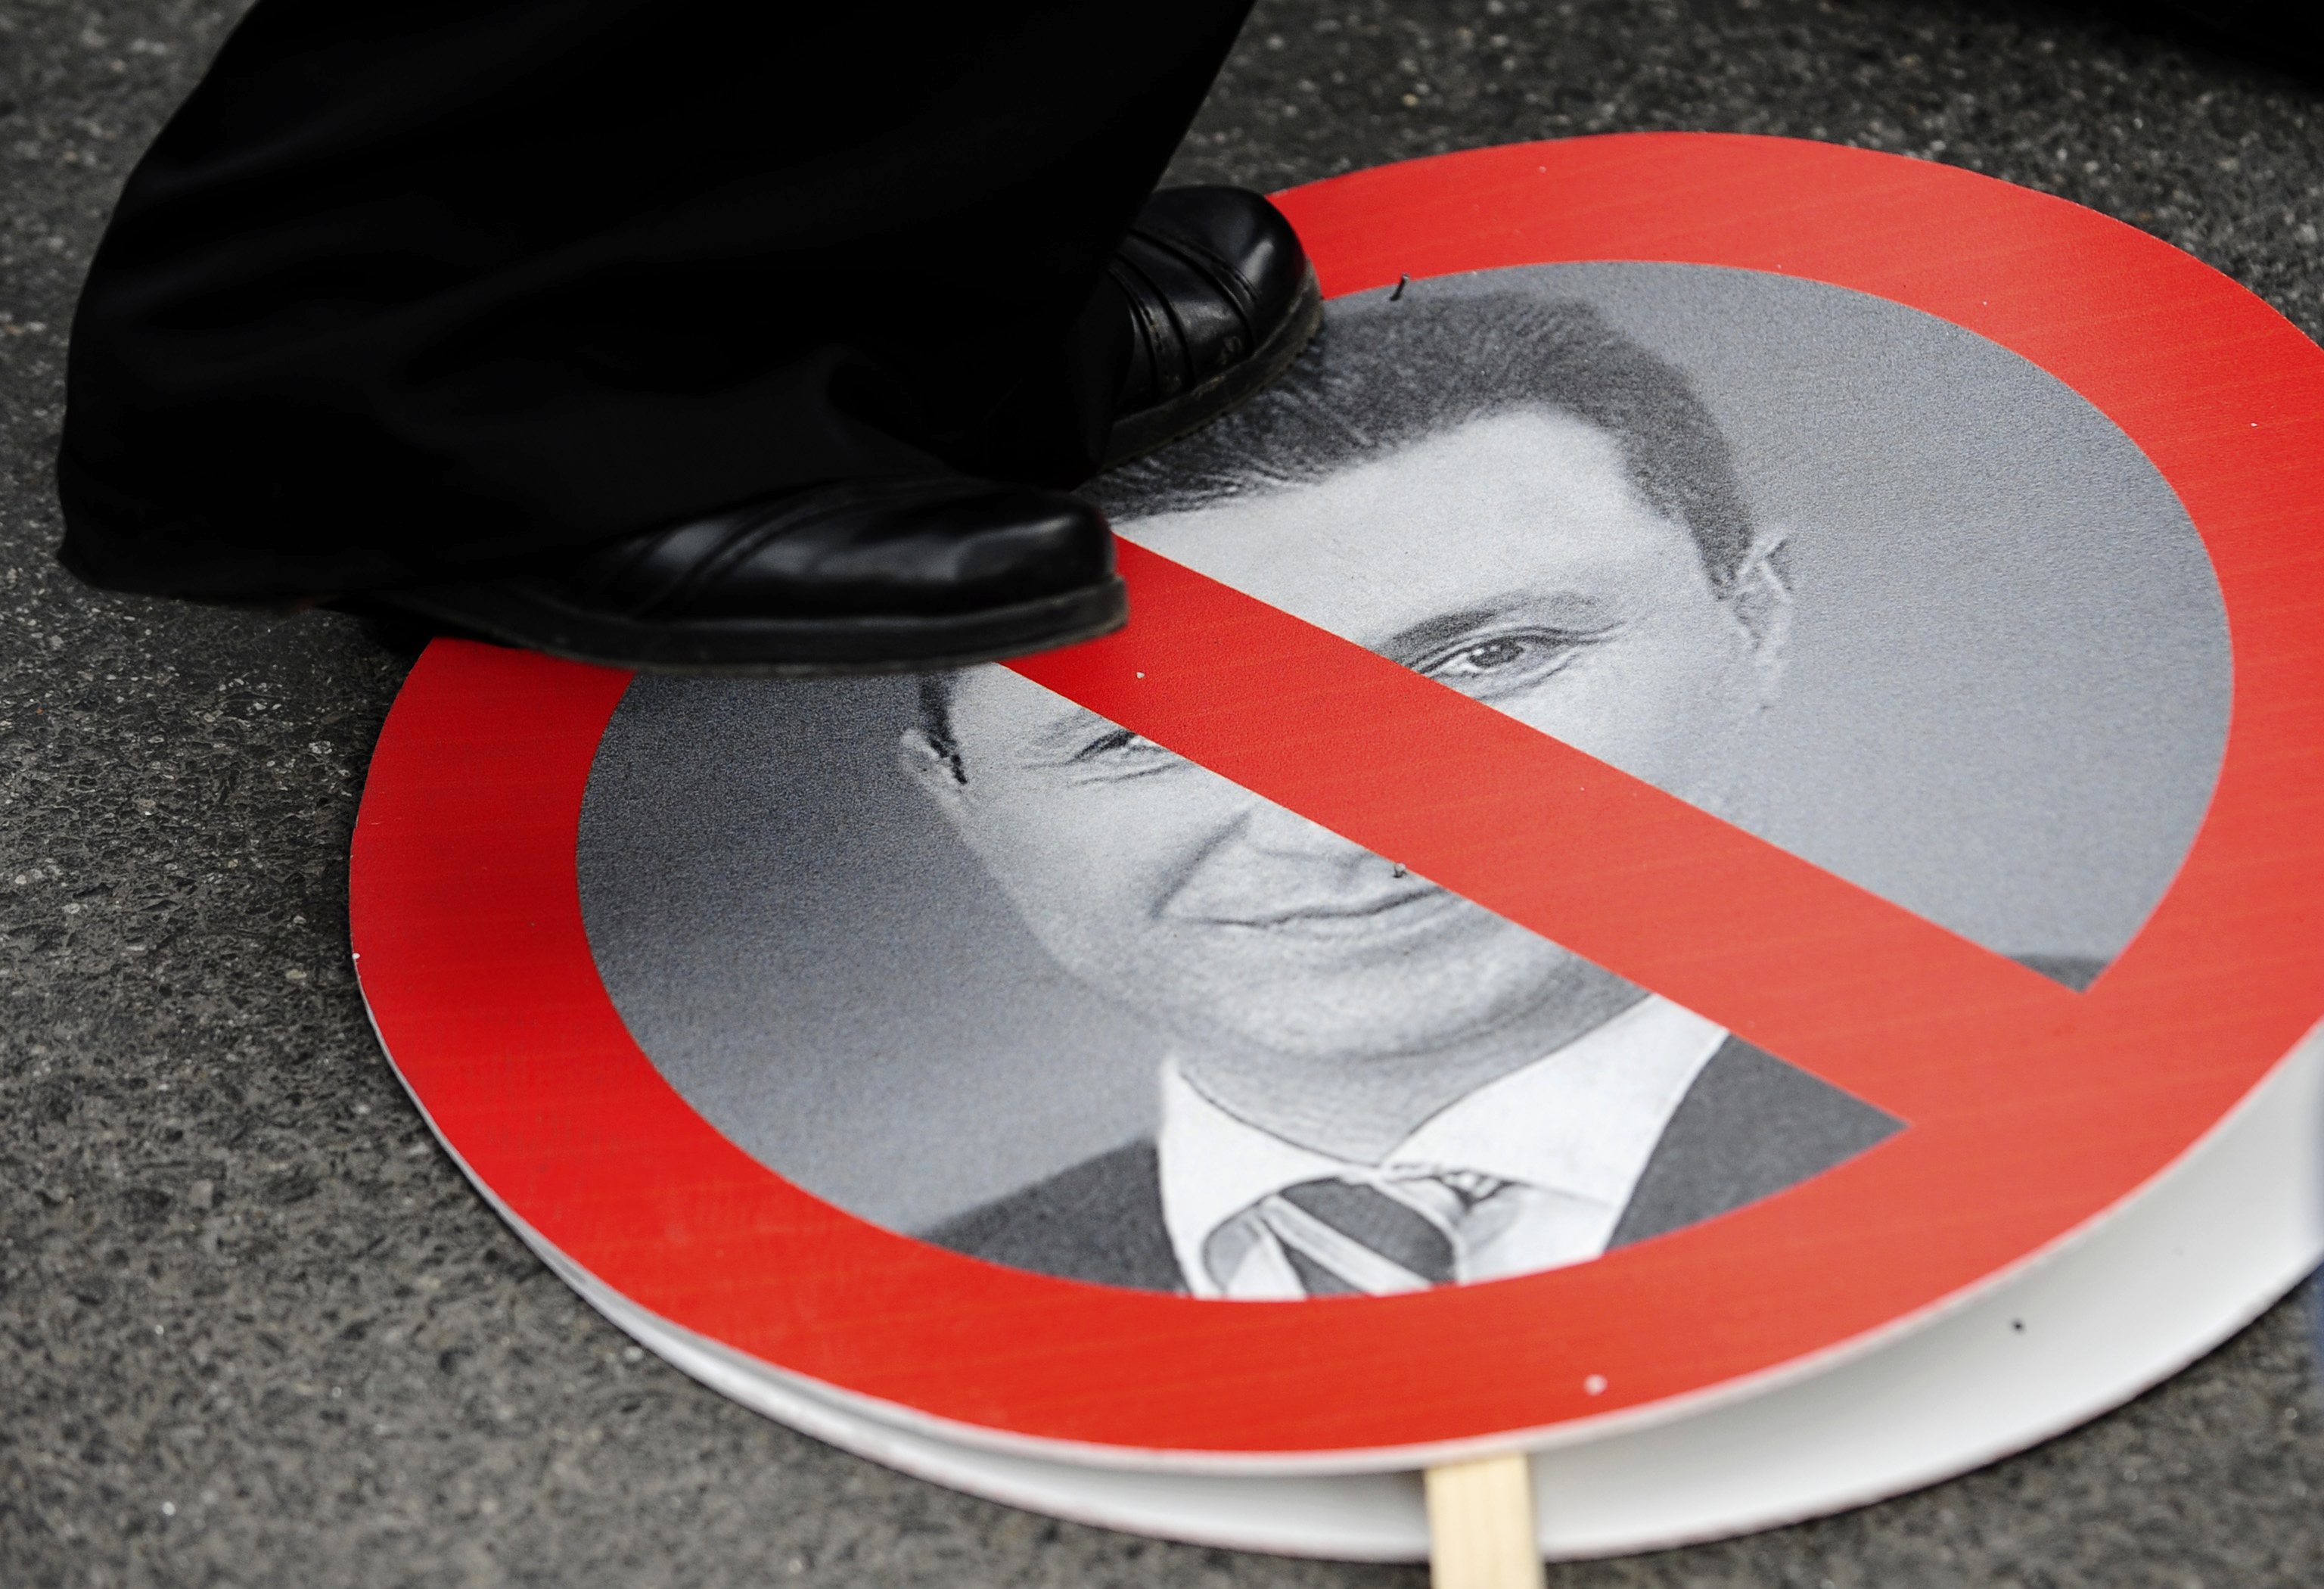 A protester steps on a sign with a portrait of Macedonian Prime Minister Nikola Gruevski during an anti-government demonstration in Skopje, Macedonia, May 17, 2015. Tens of thousands of protesters took to the streets of Macedonia's capital on Sunday, waving Macedonian and Albanian flags in a dramatic display of ethnic unity against a government on the ropes after months of damaging wire-tap revelations. REUTERS/Ognen Teofilovski